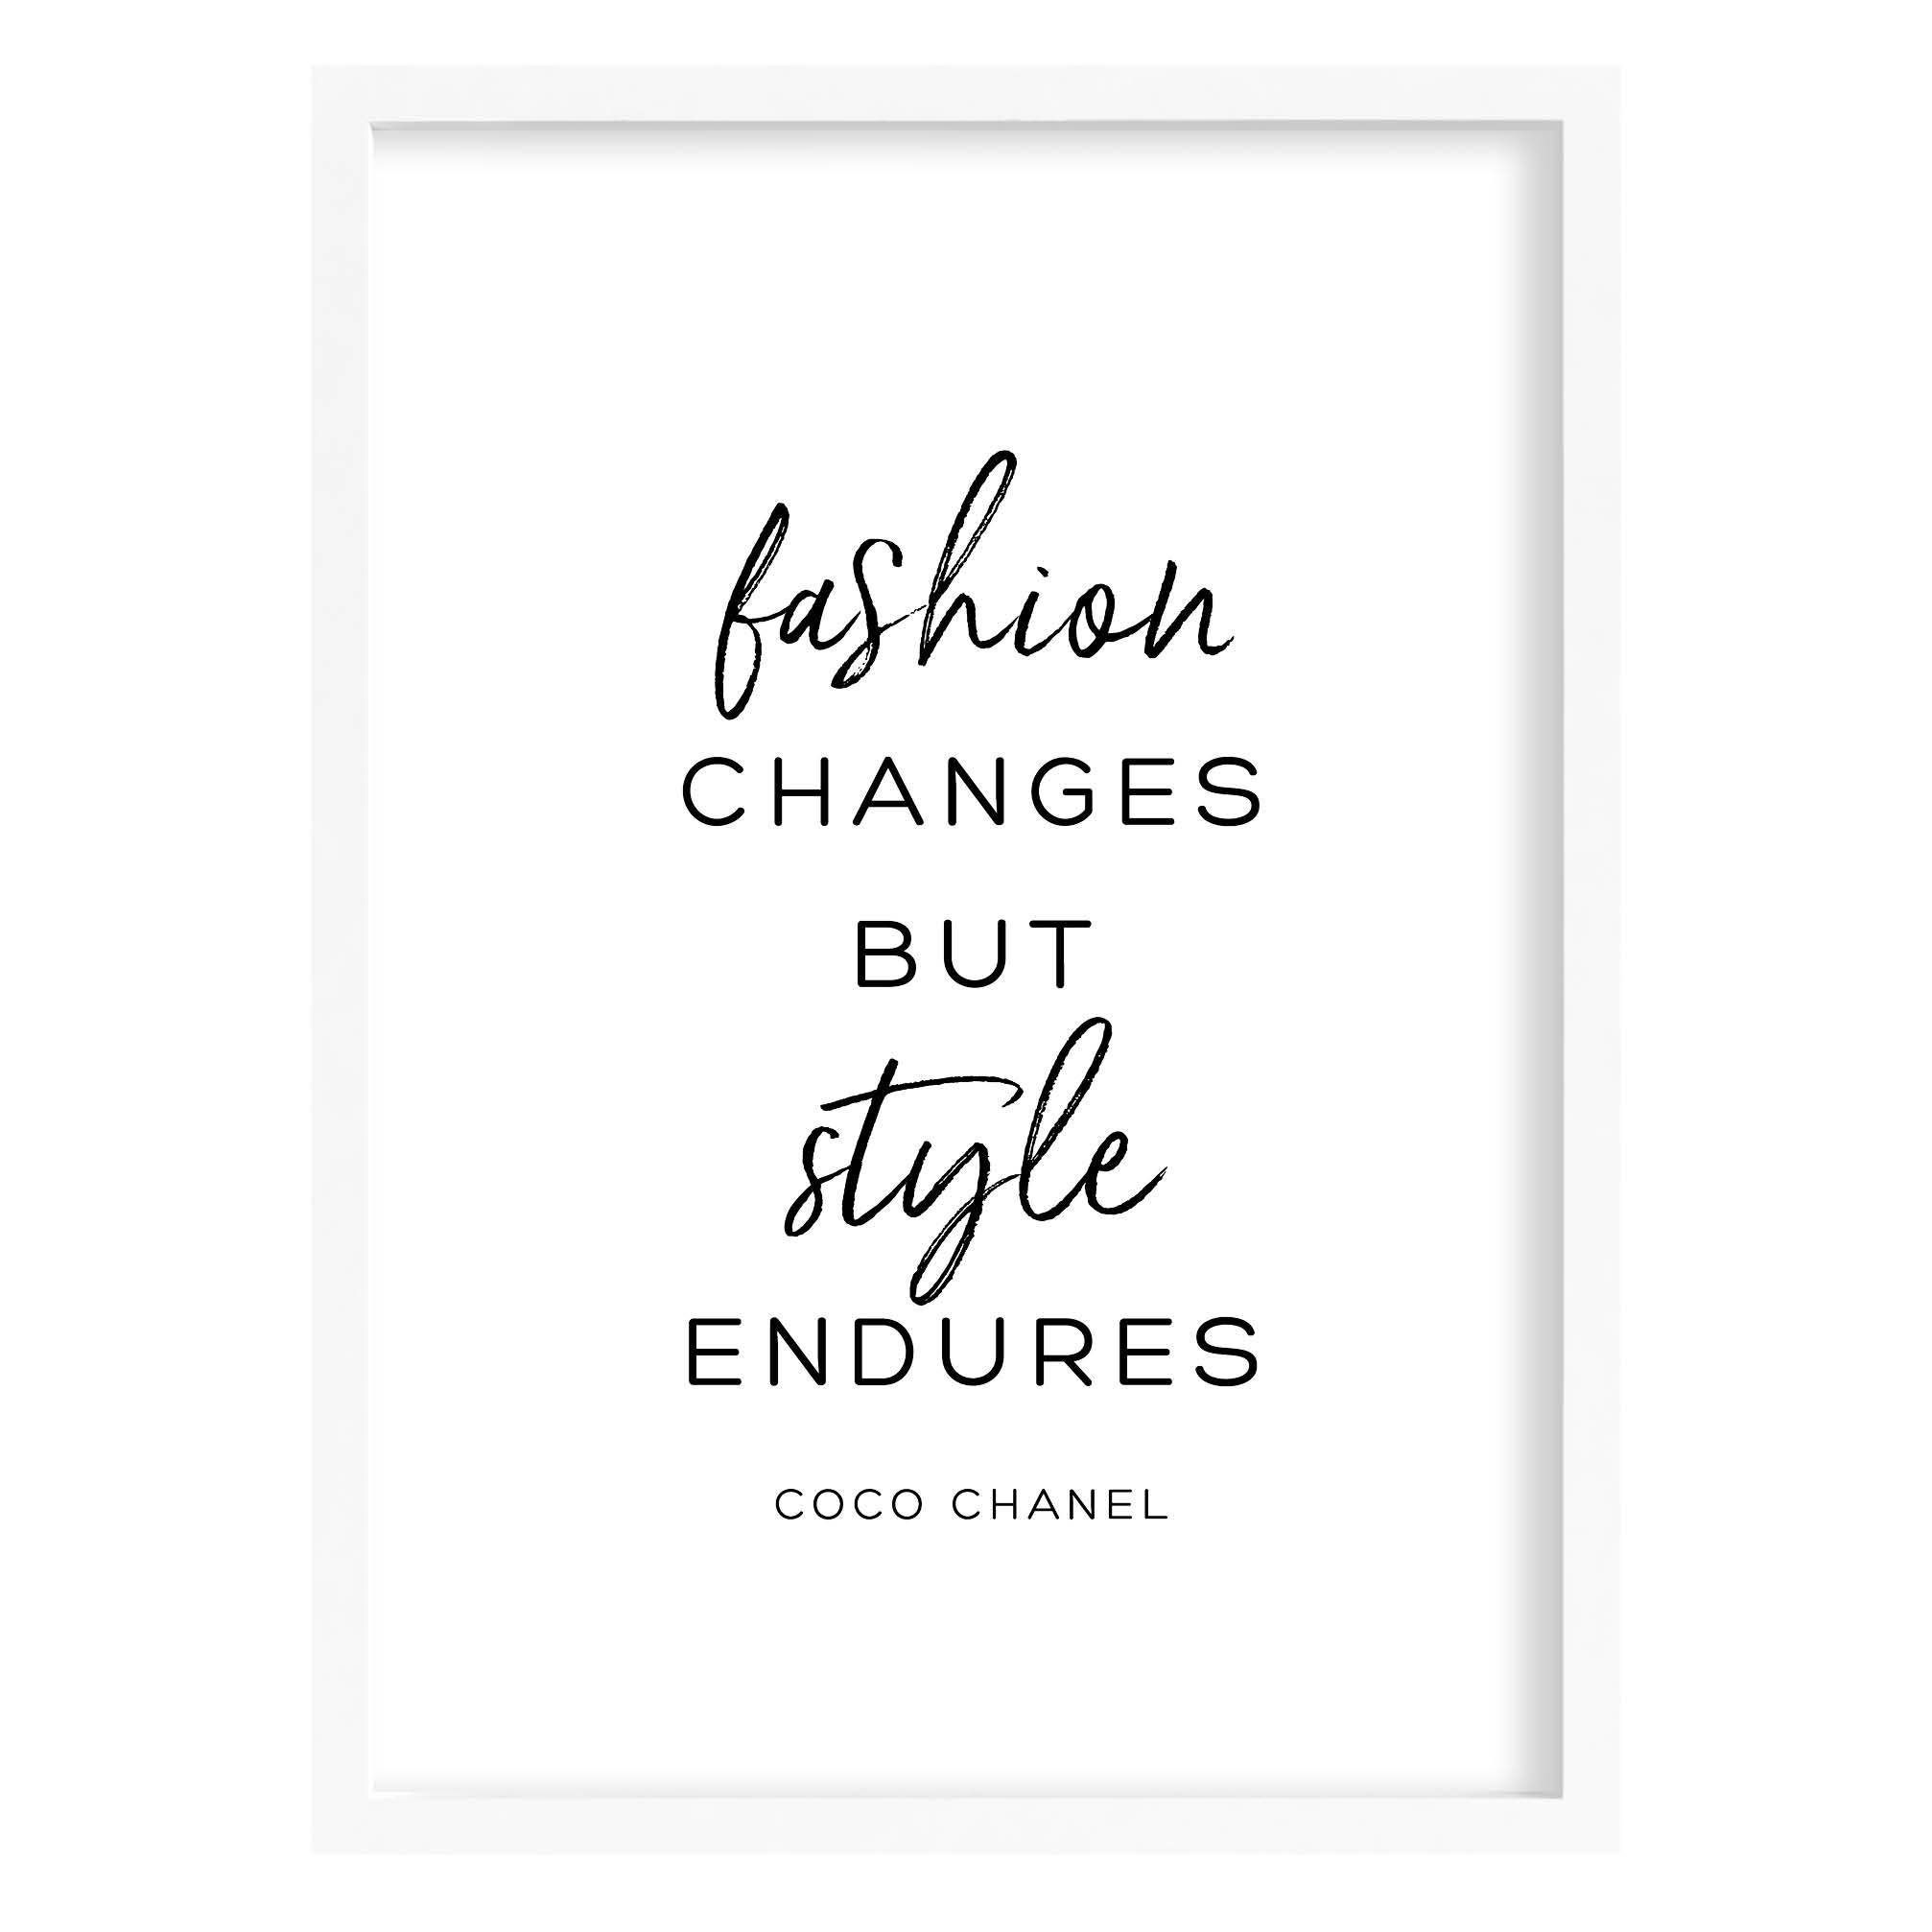 Amazoncom Elegance is  Coco Chanel Quote Wall Art  11x14 UNFRAMED  Black White Green Art Print  Contemporary Positive Inspirational  Famous Quotes Botanical Home Decor  Handmade Products